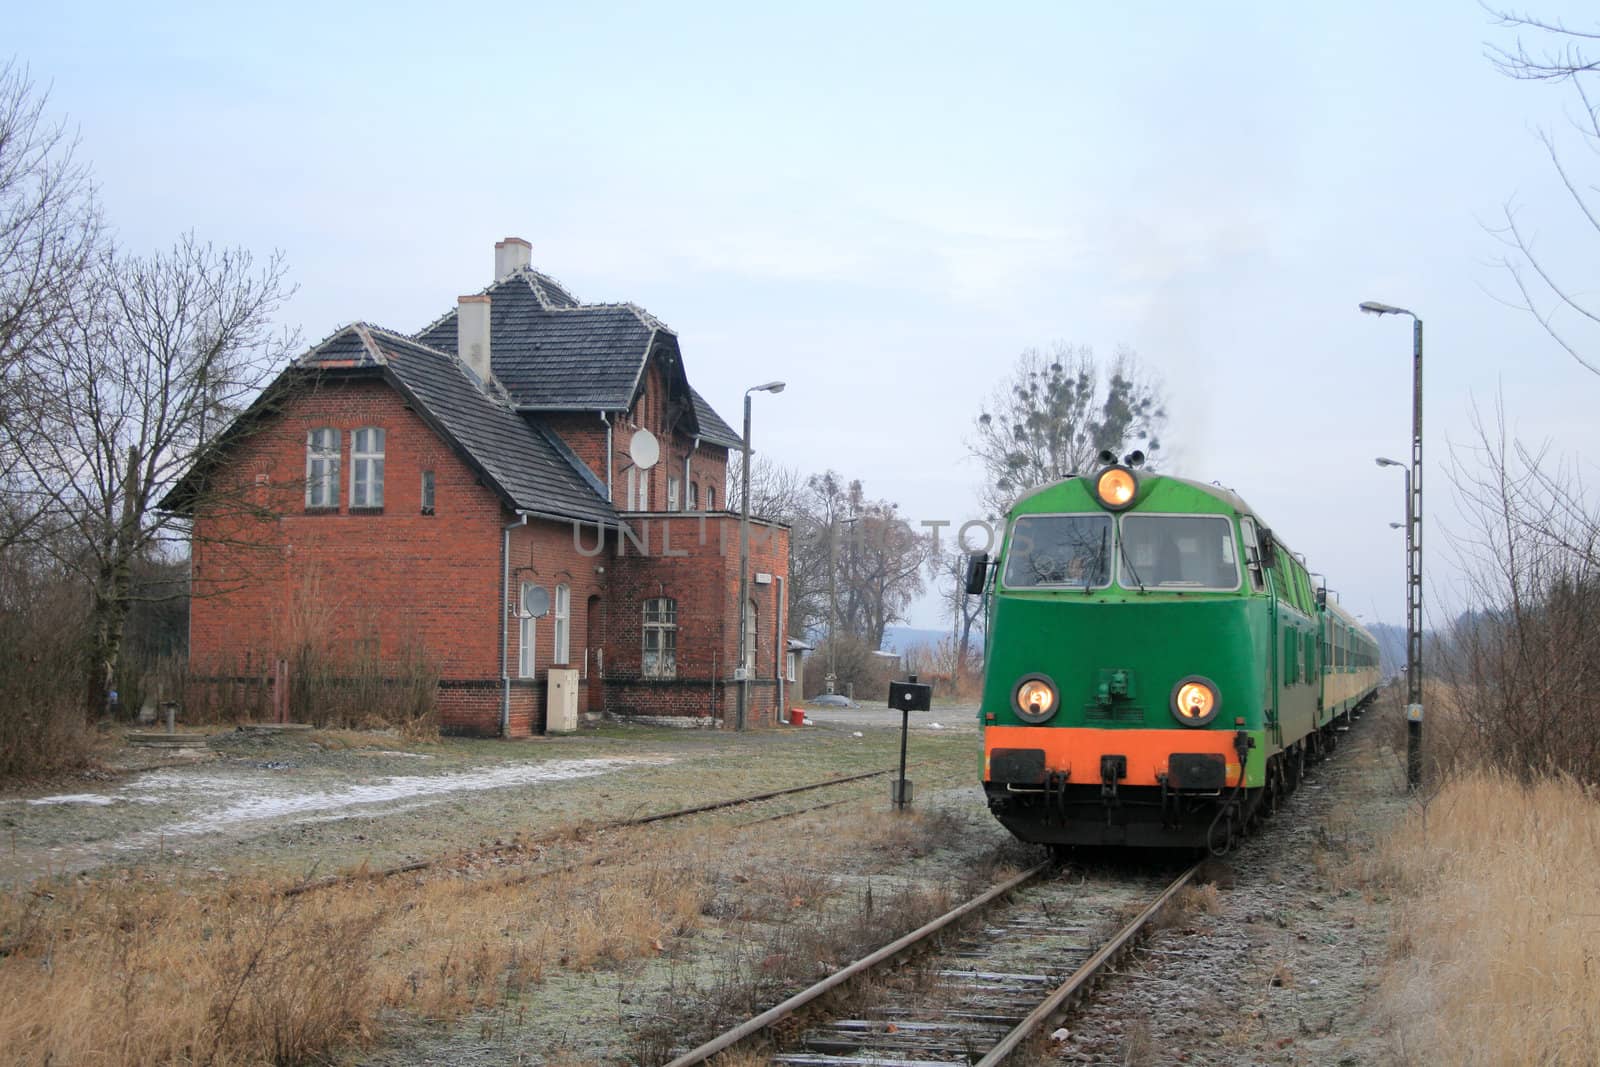 Train starting from the old small station